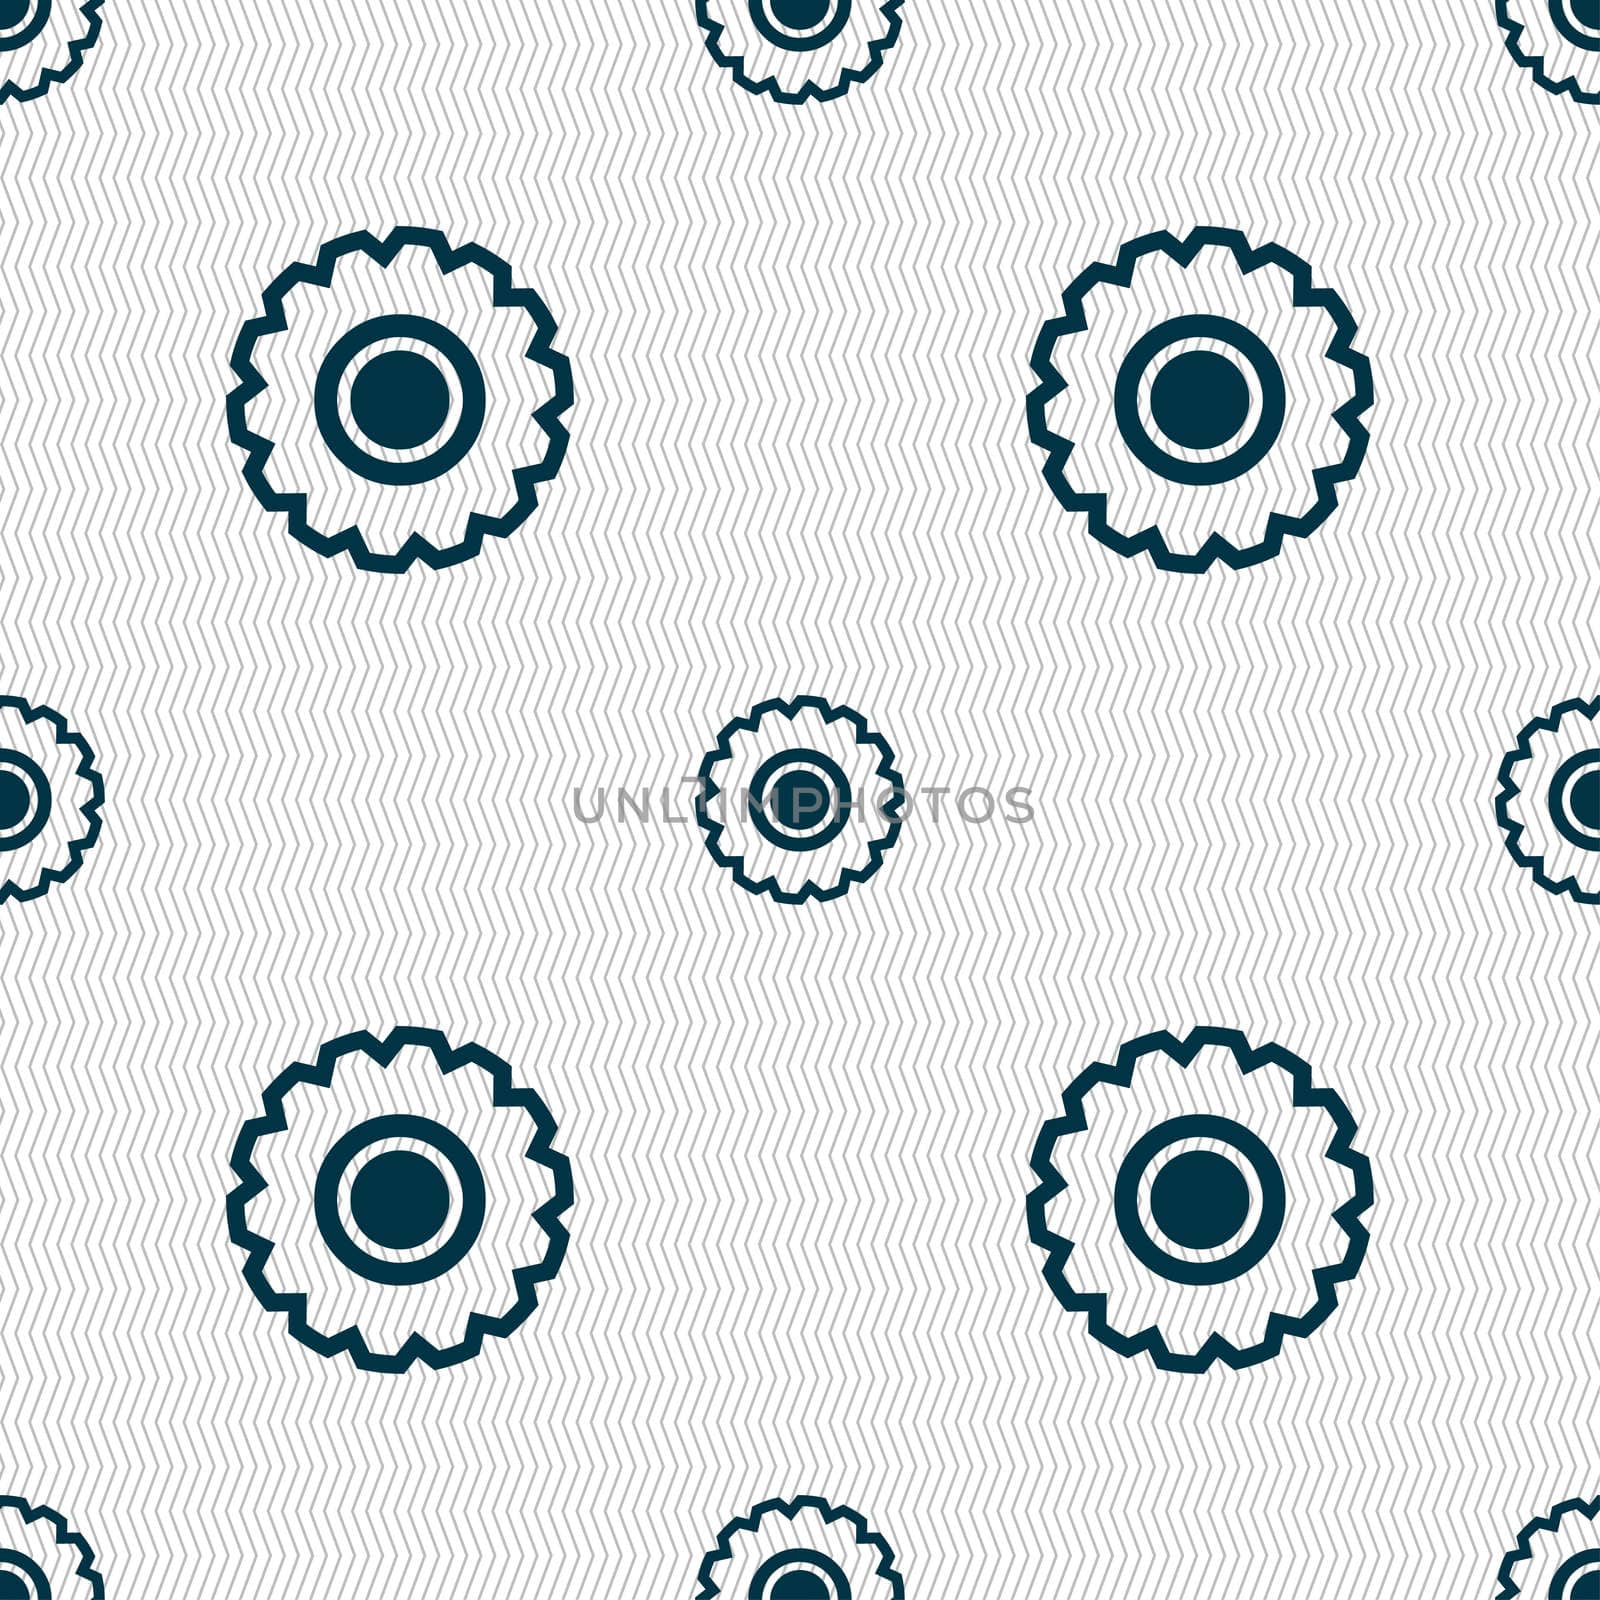  sign. Seamless pattern with geometric texture. illustration